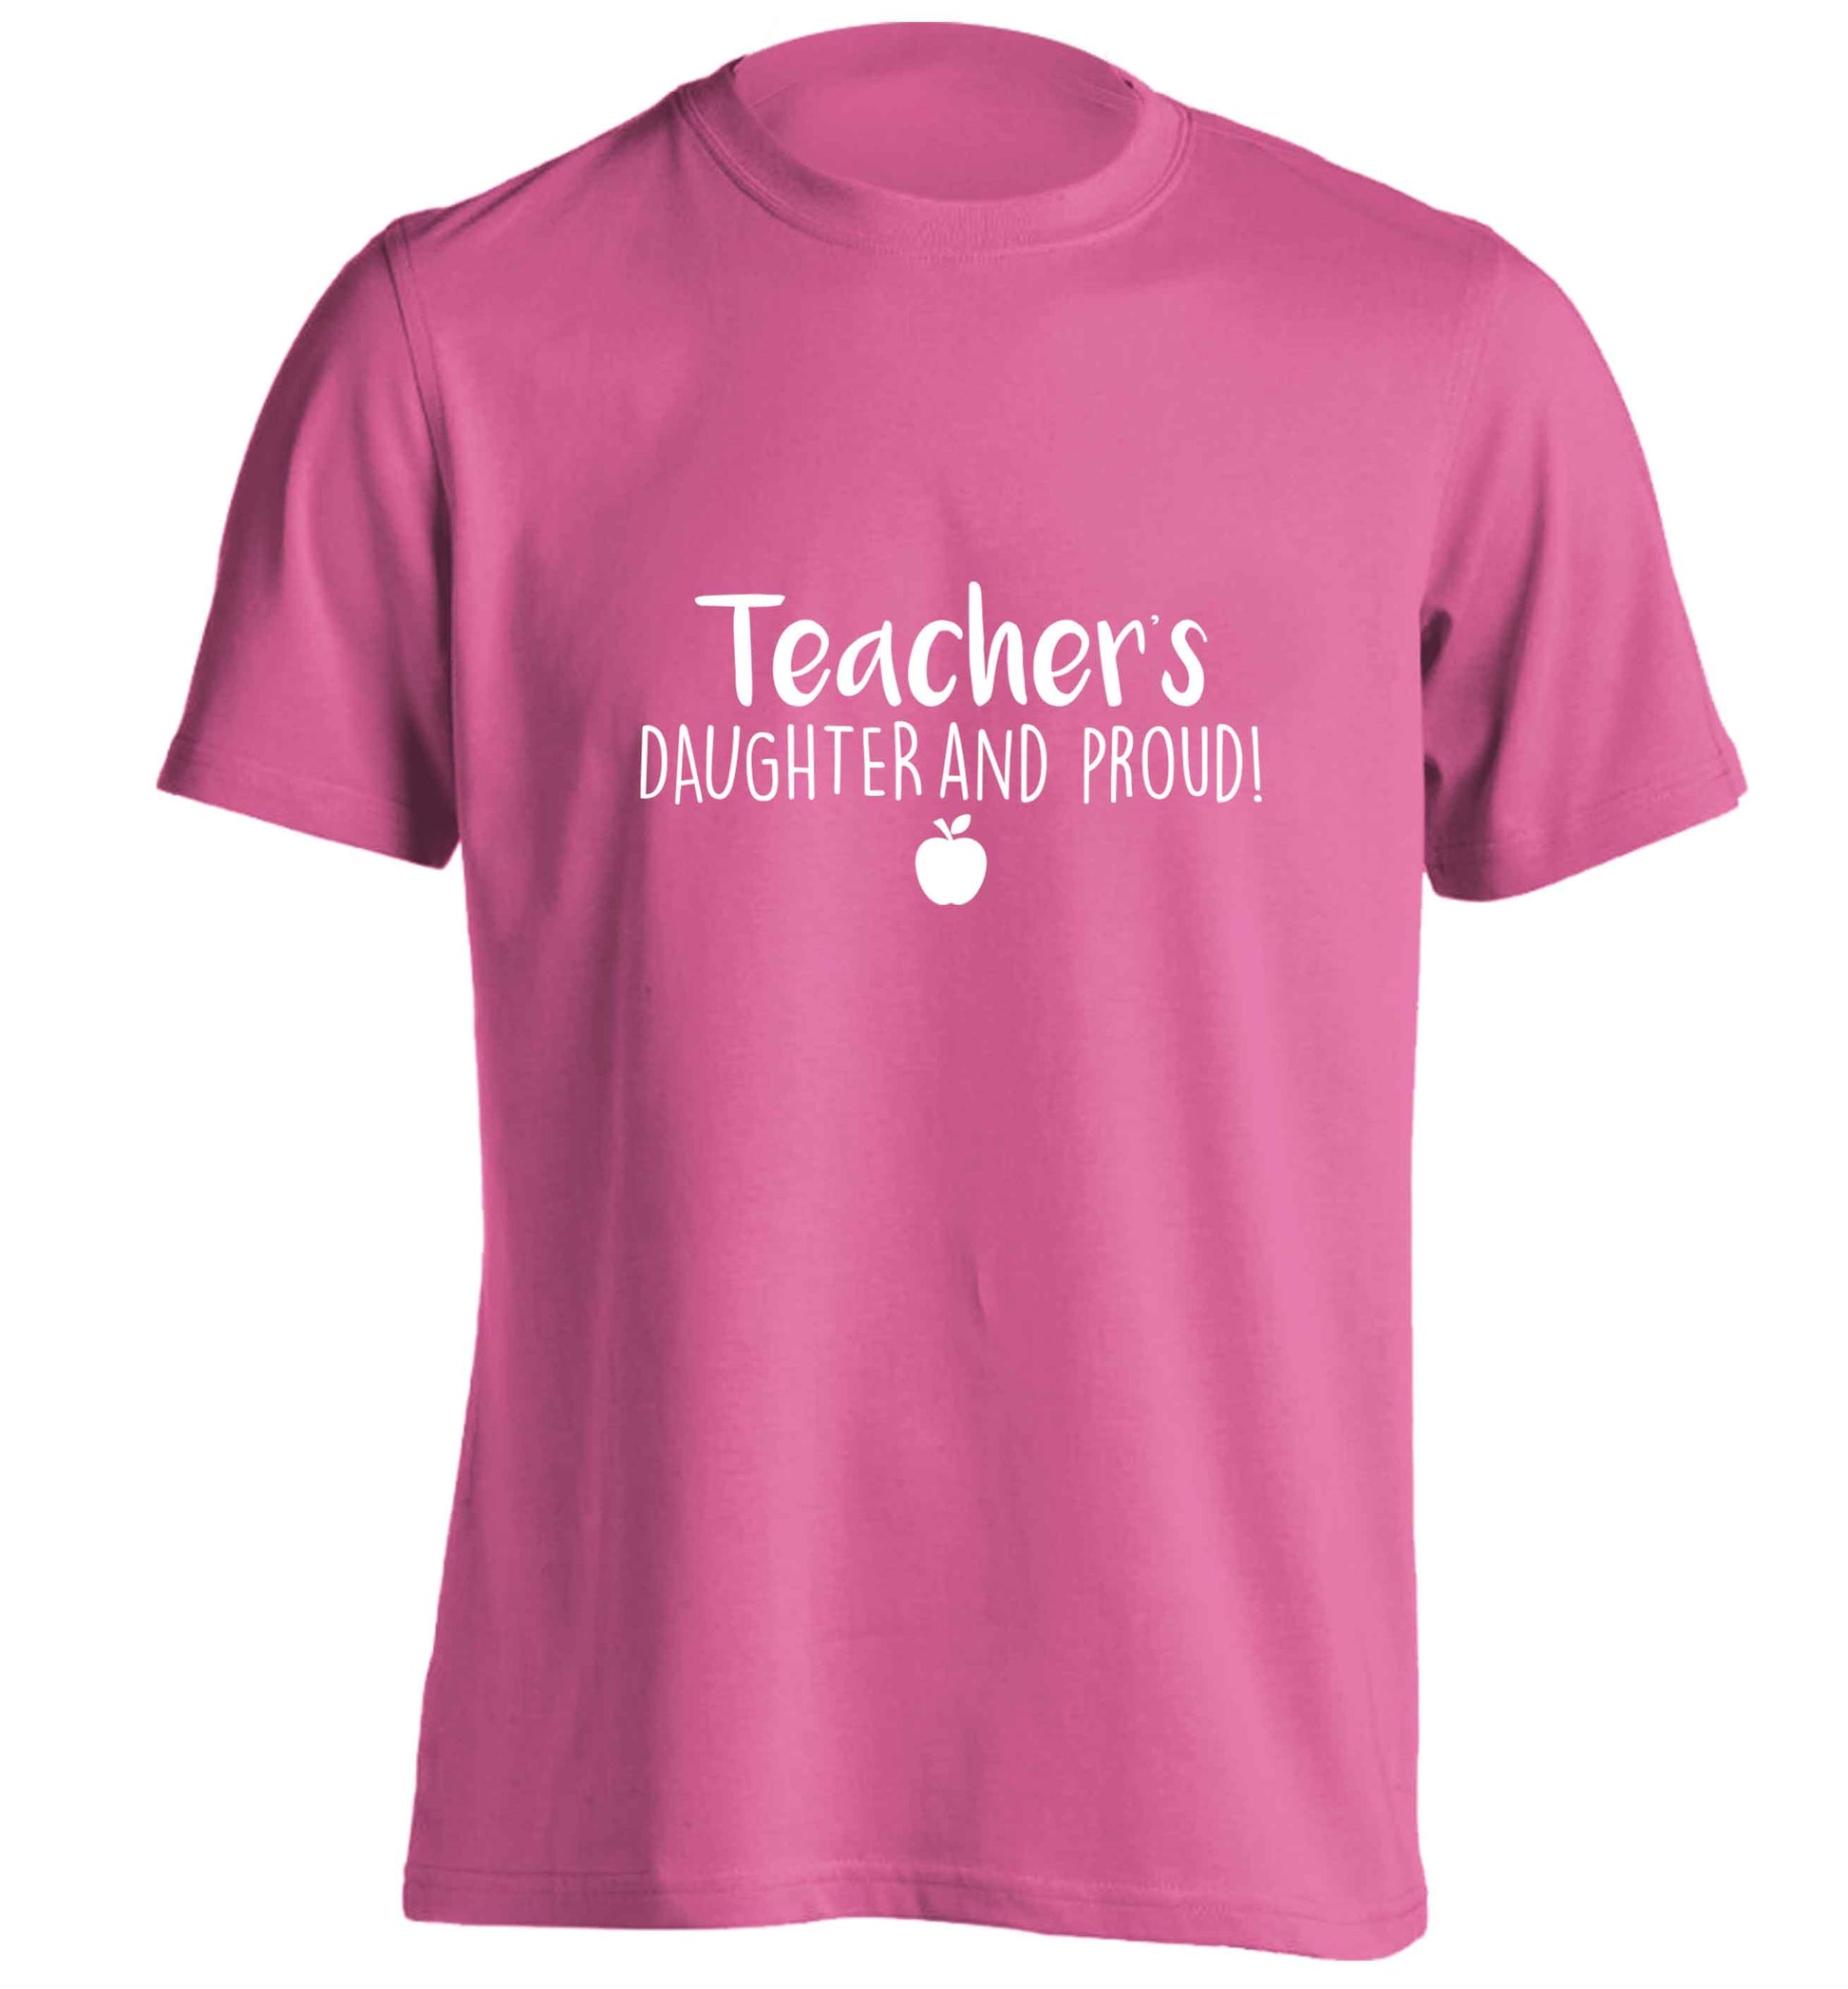 Teachers daughter and proud adults unisex pink Tshirt 2XL